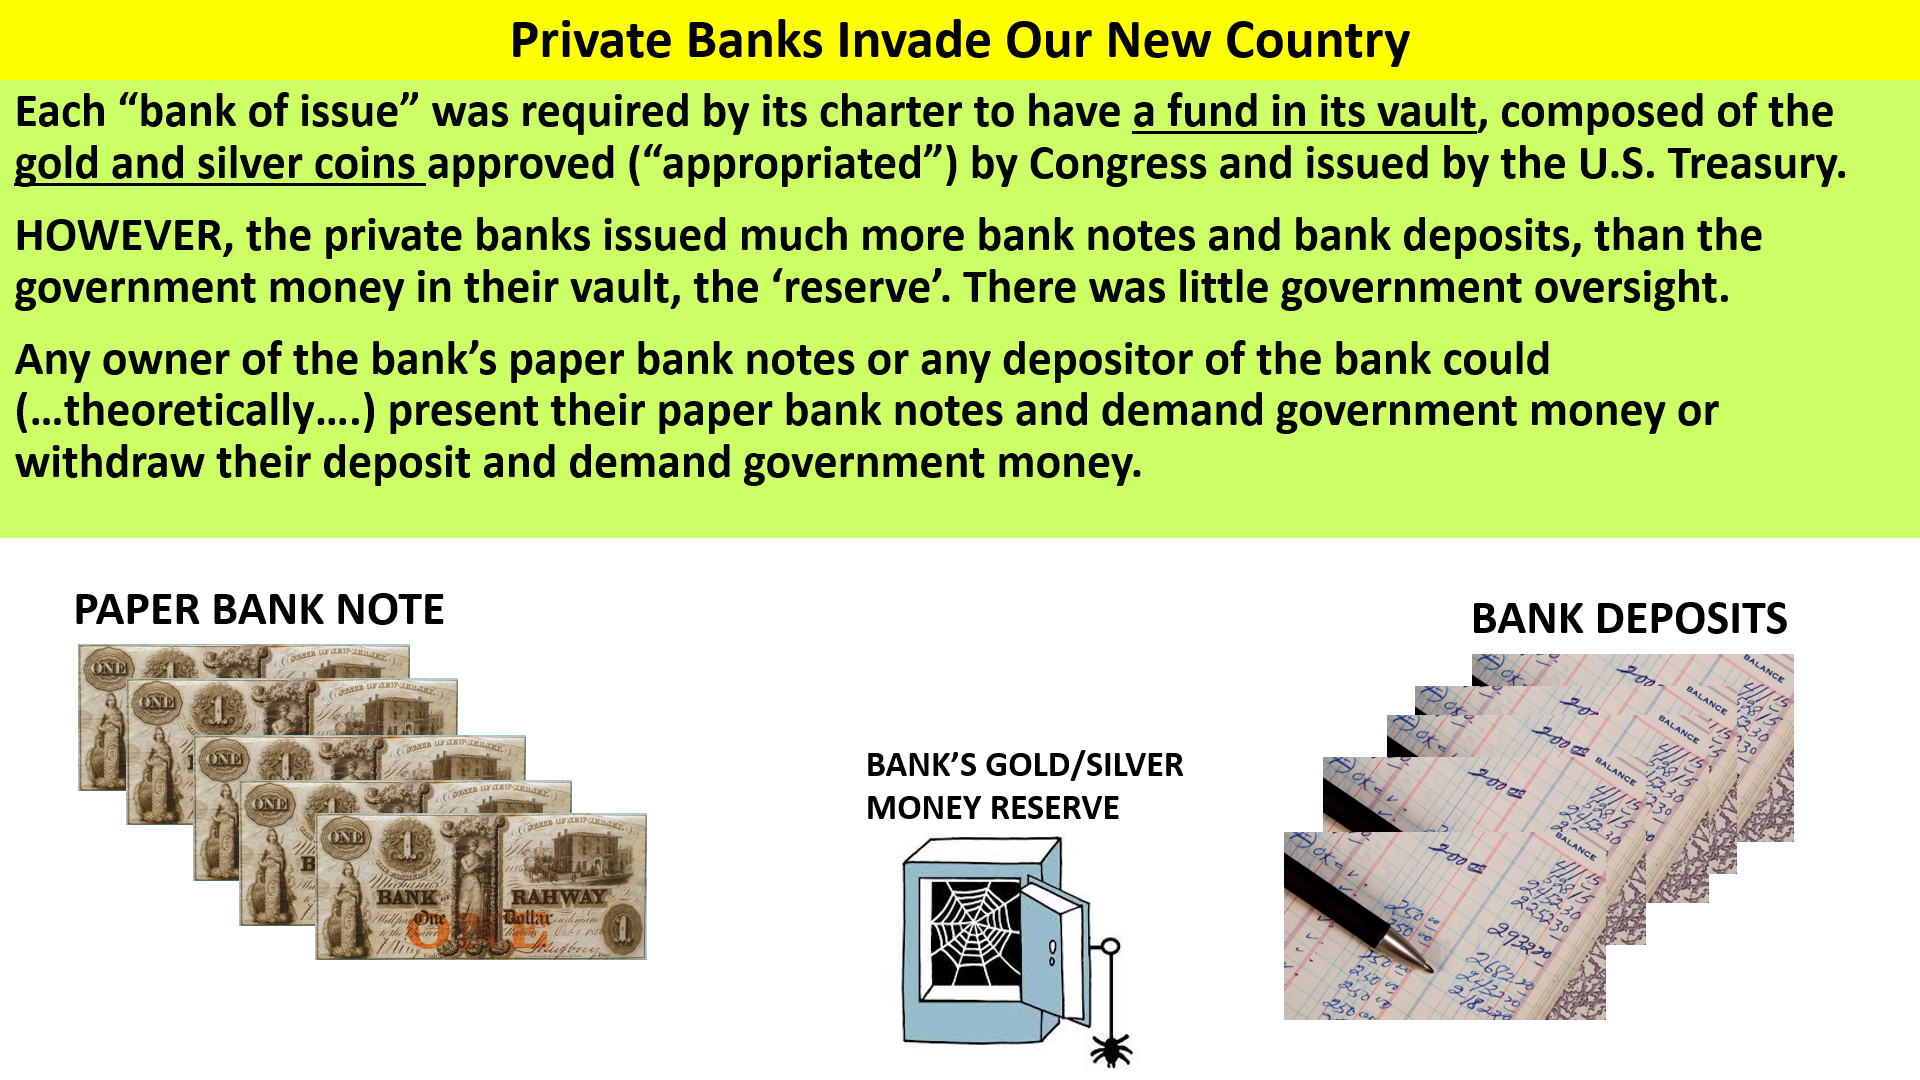 banks issued more notes than they had money to cover